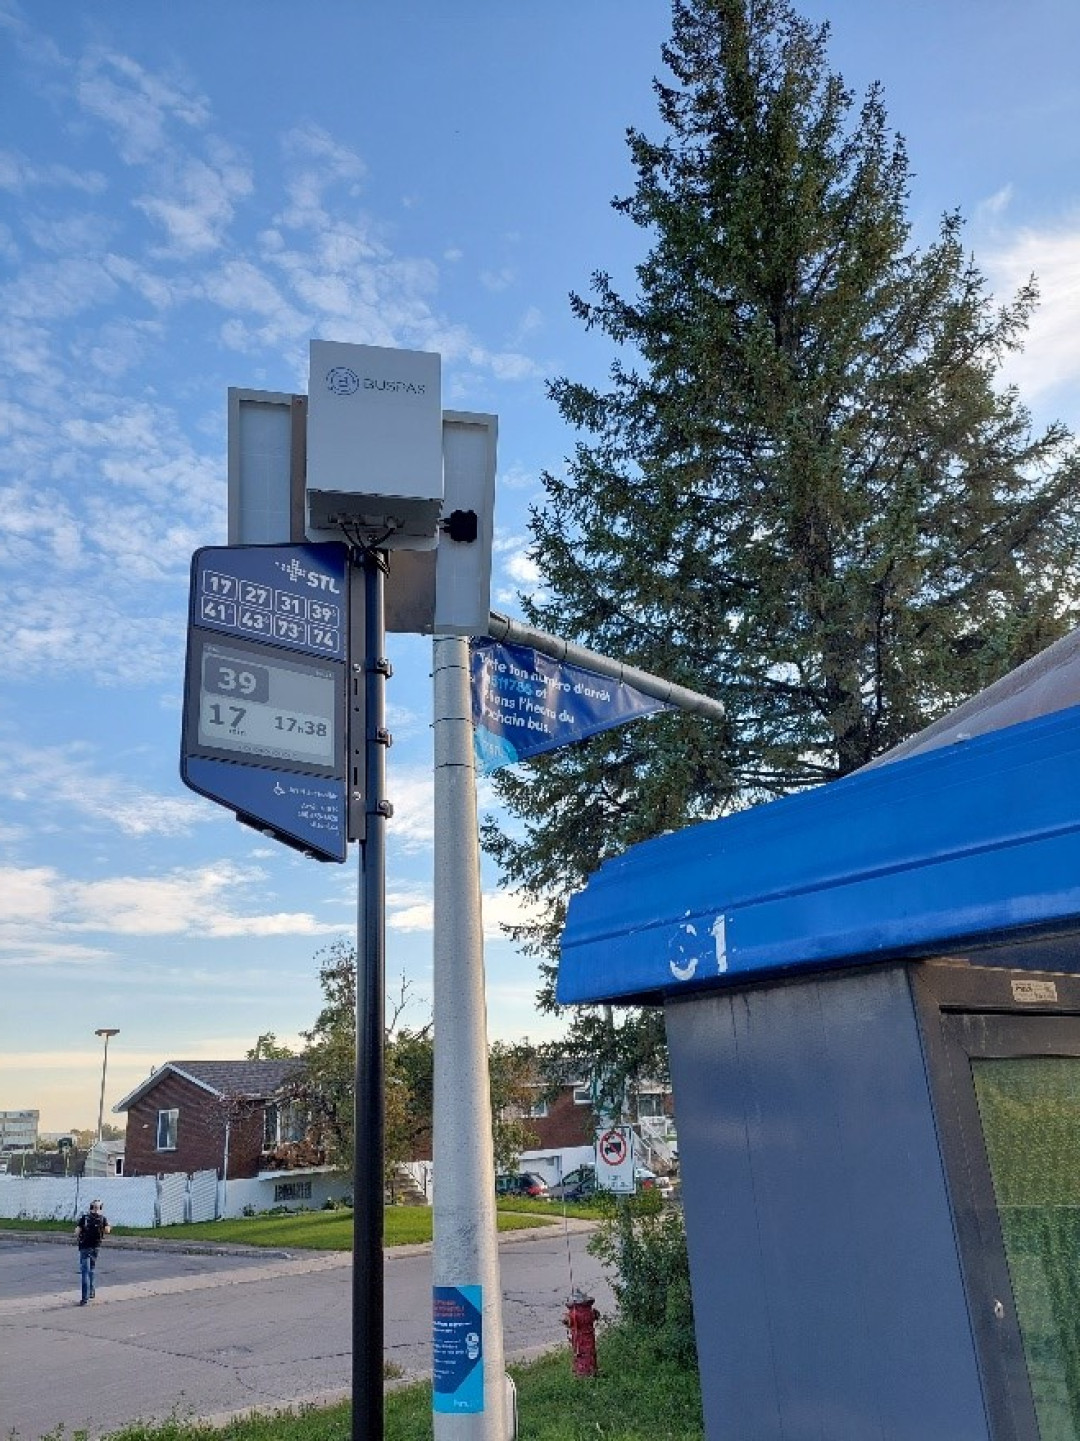 A new digital display prototype at a bus stop.